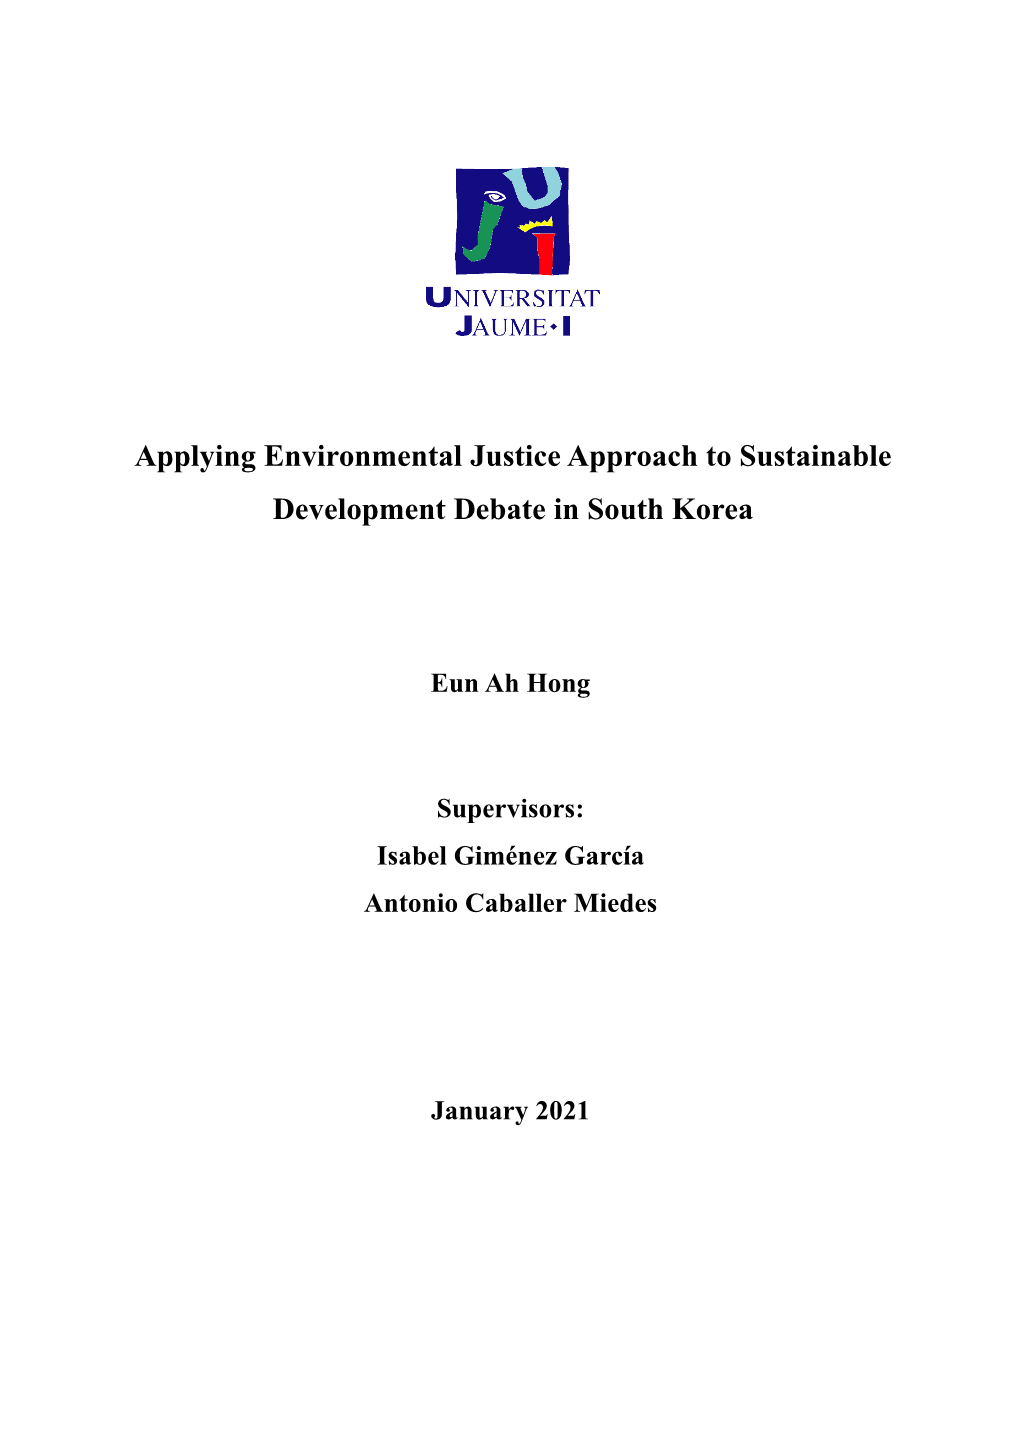 Applying Environmental Justice Approach to Sustainable Development Debate in South Korea